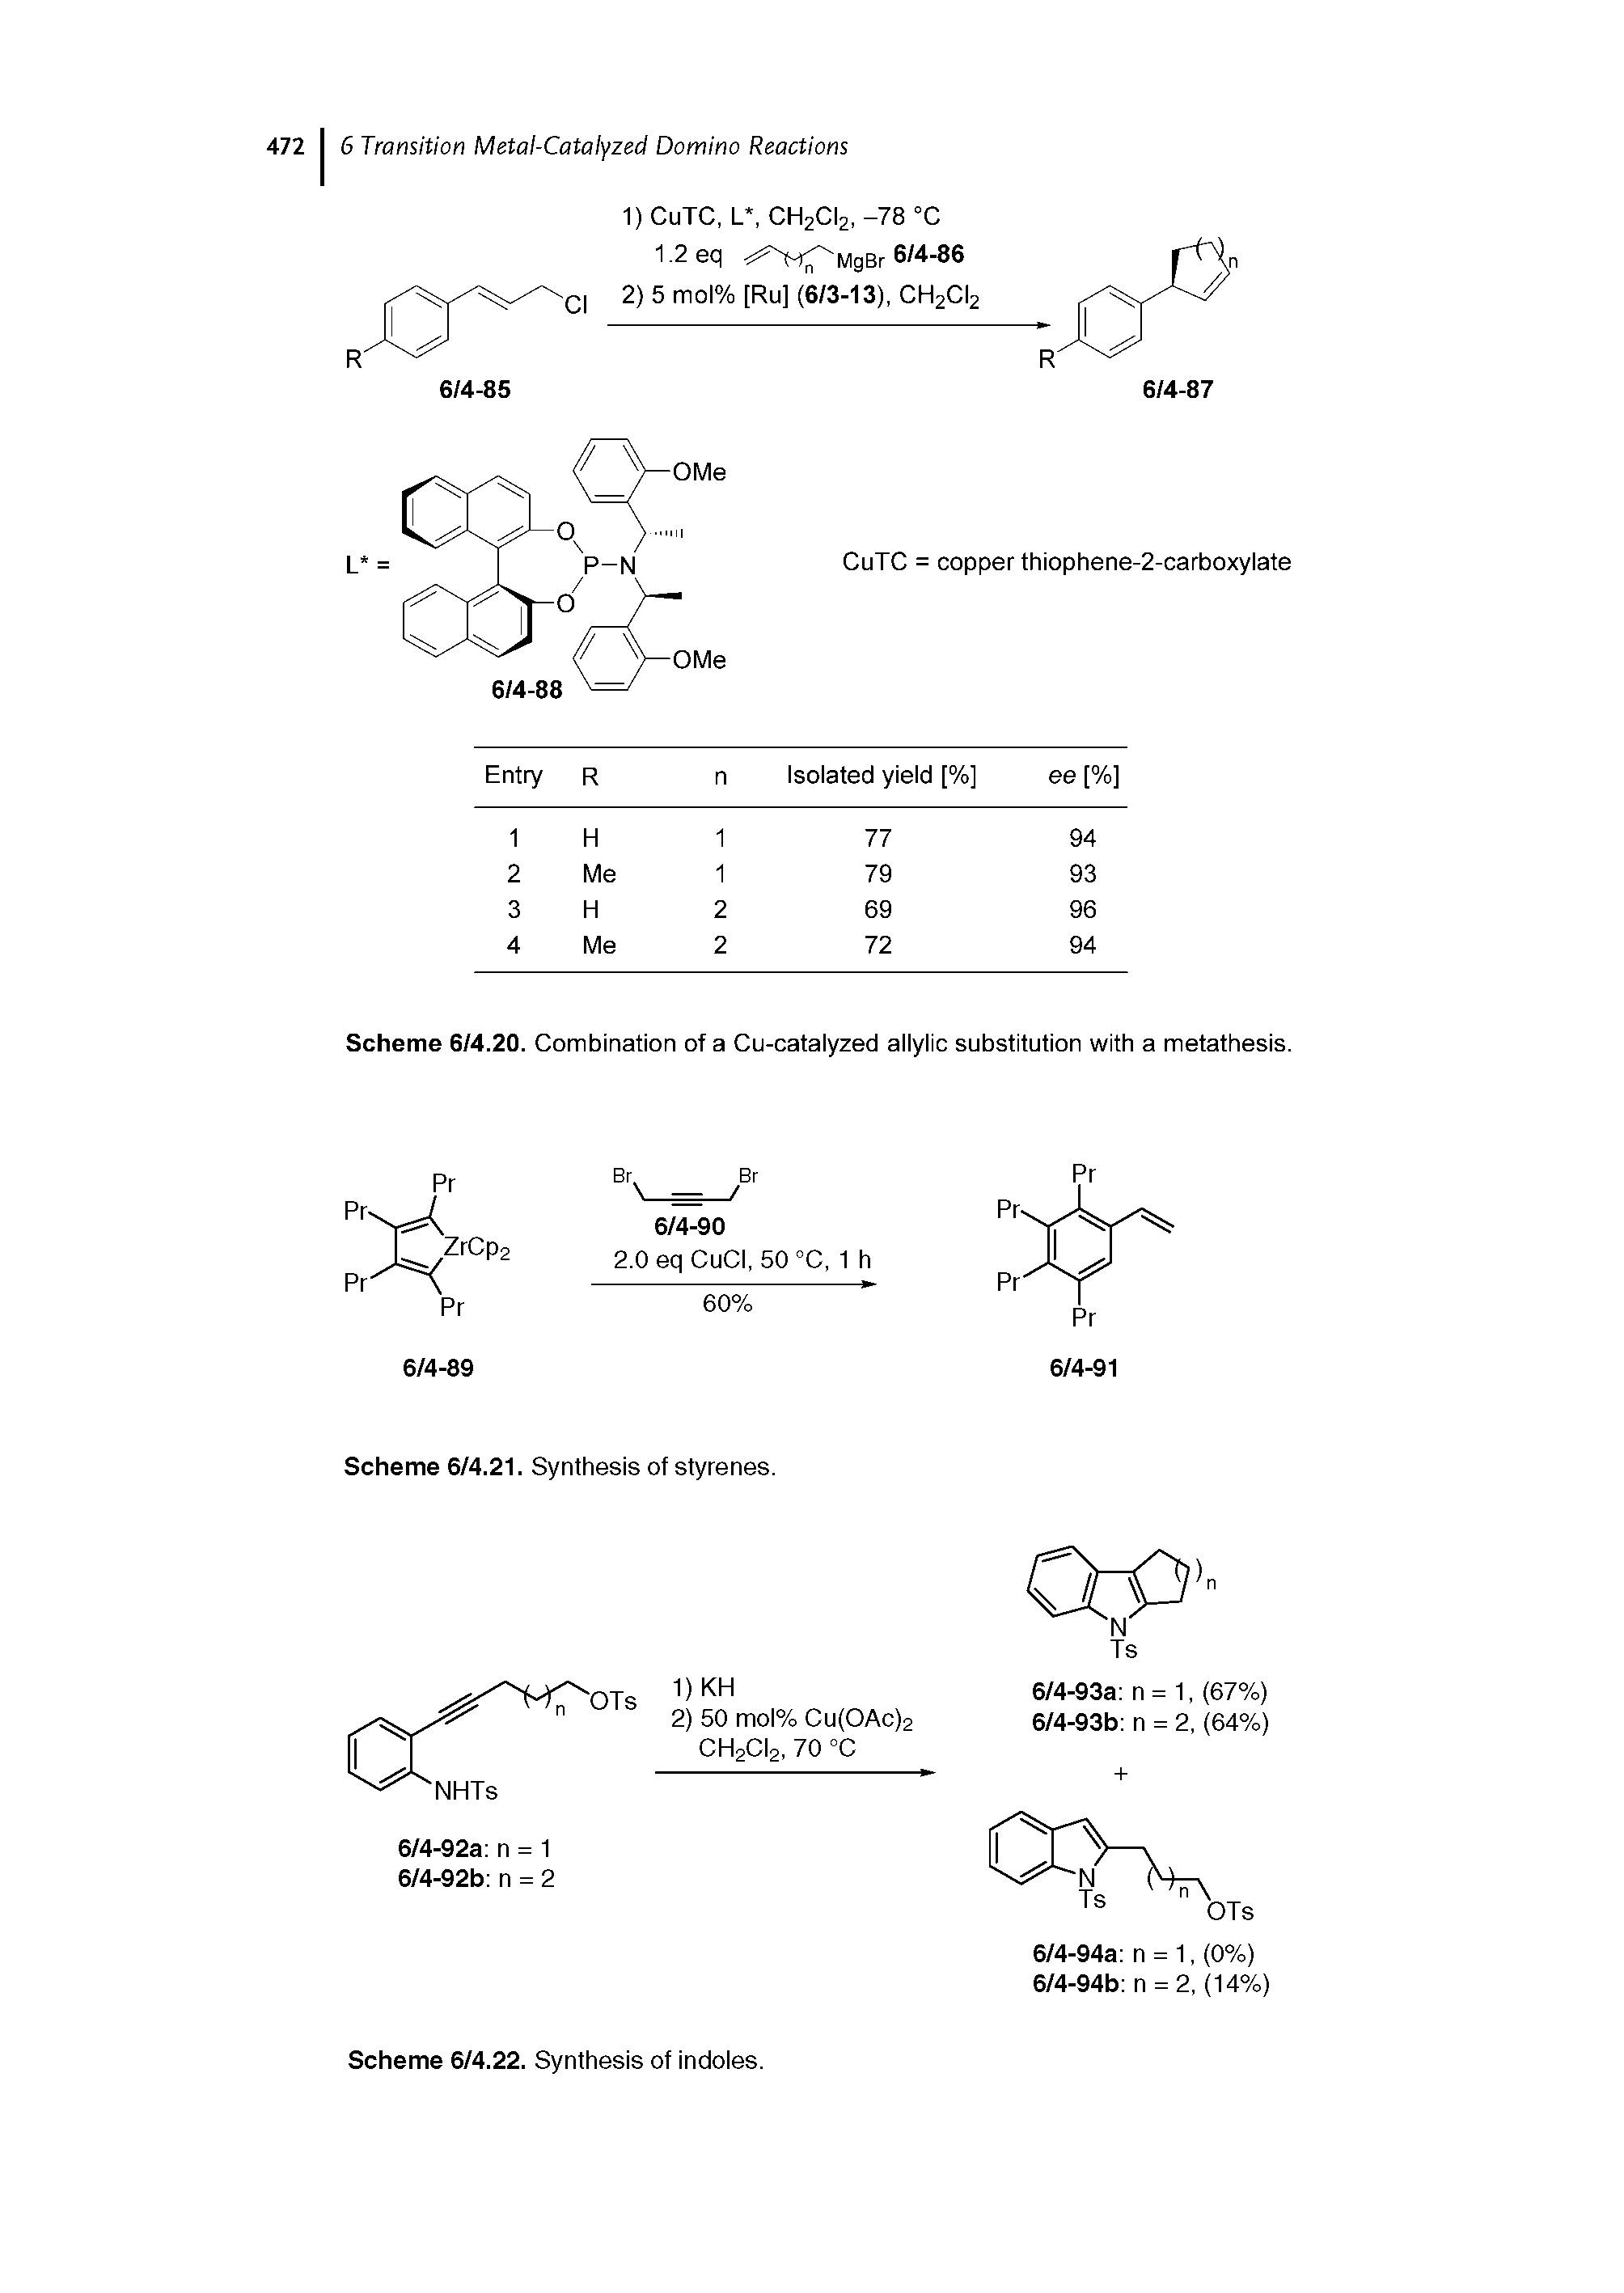 Scheme 6/4.20. Combination of a Cu-catalyzed allylic substitution with a metathesis.